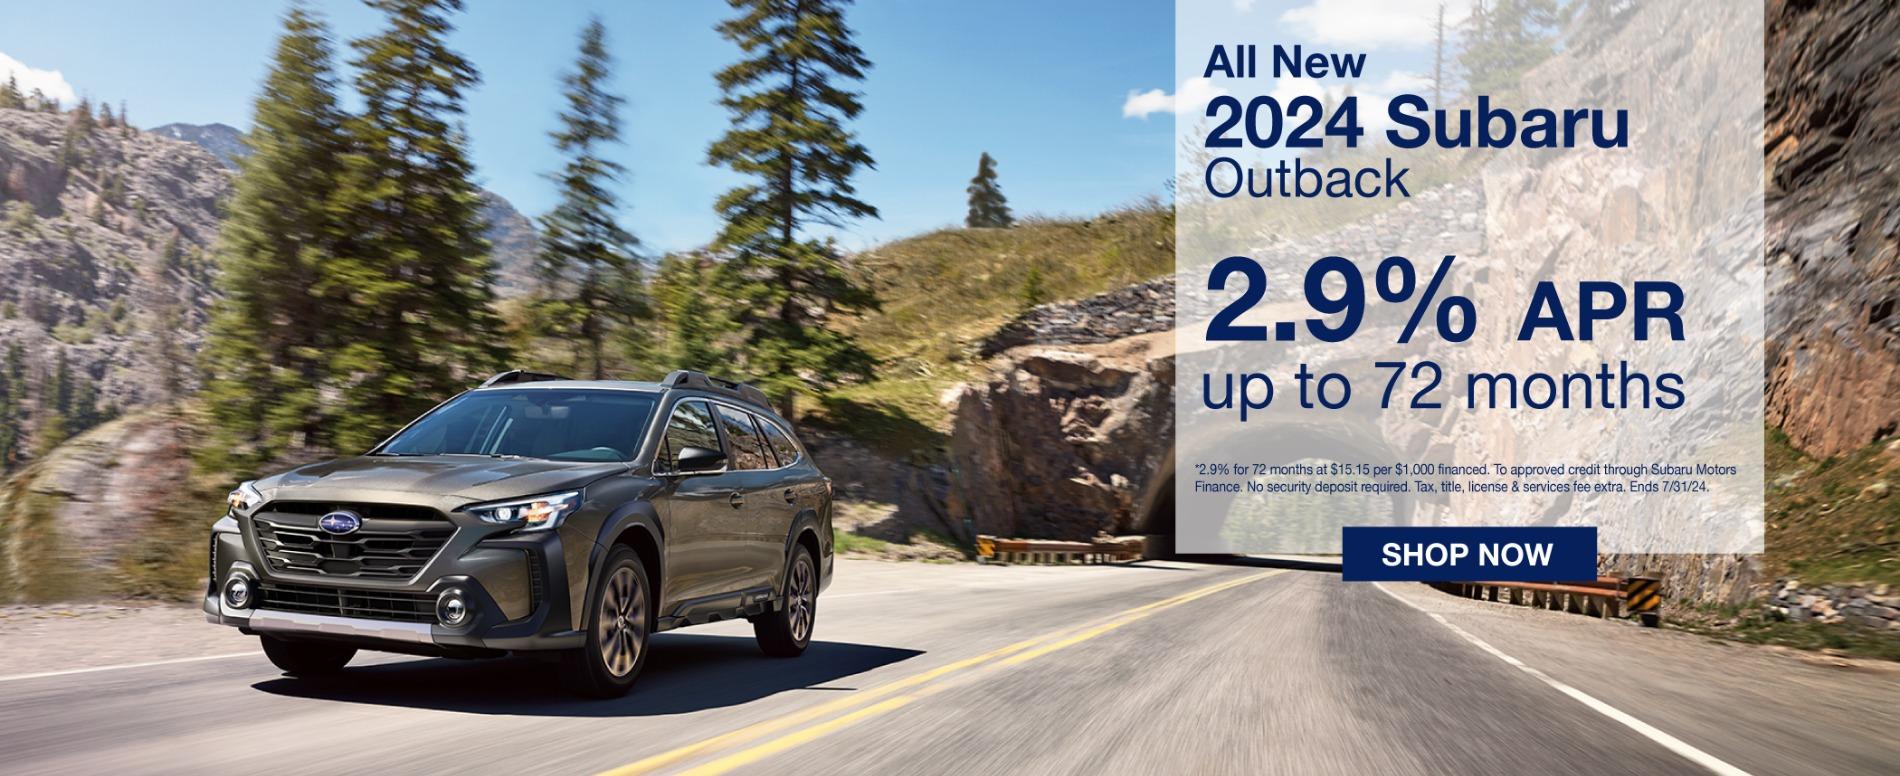 2024 Subaru Outback 2.9% APR Up to 72 months